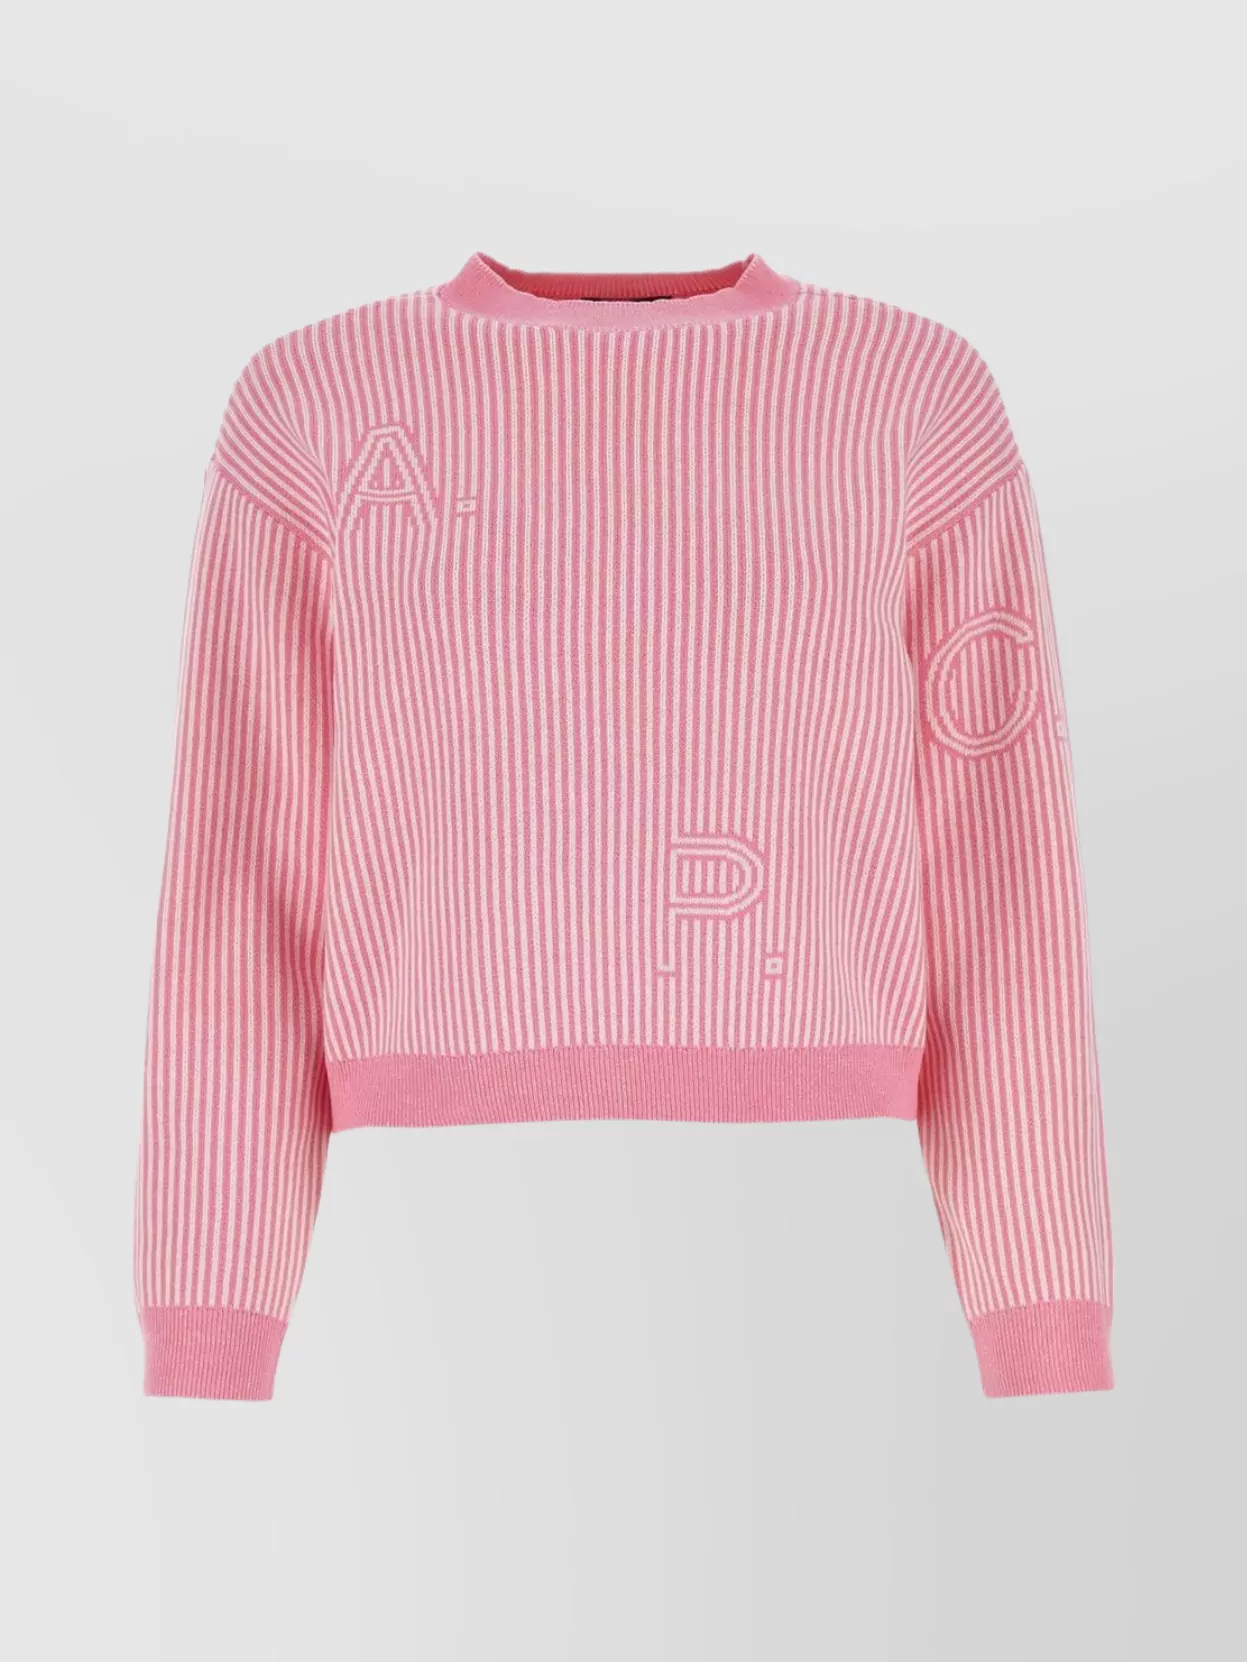 Apc Cropped Striped Embroidered Cotton Sweater In Pink